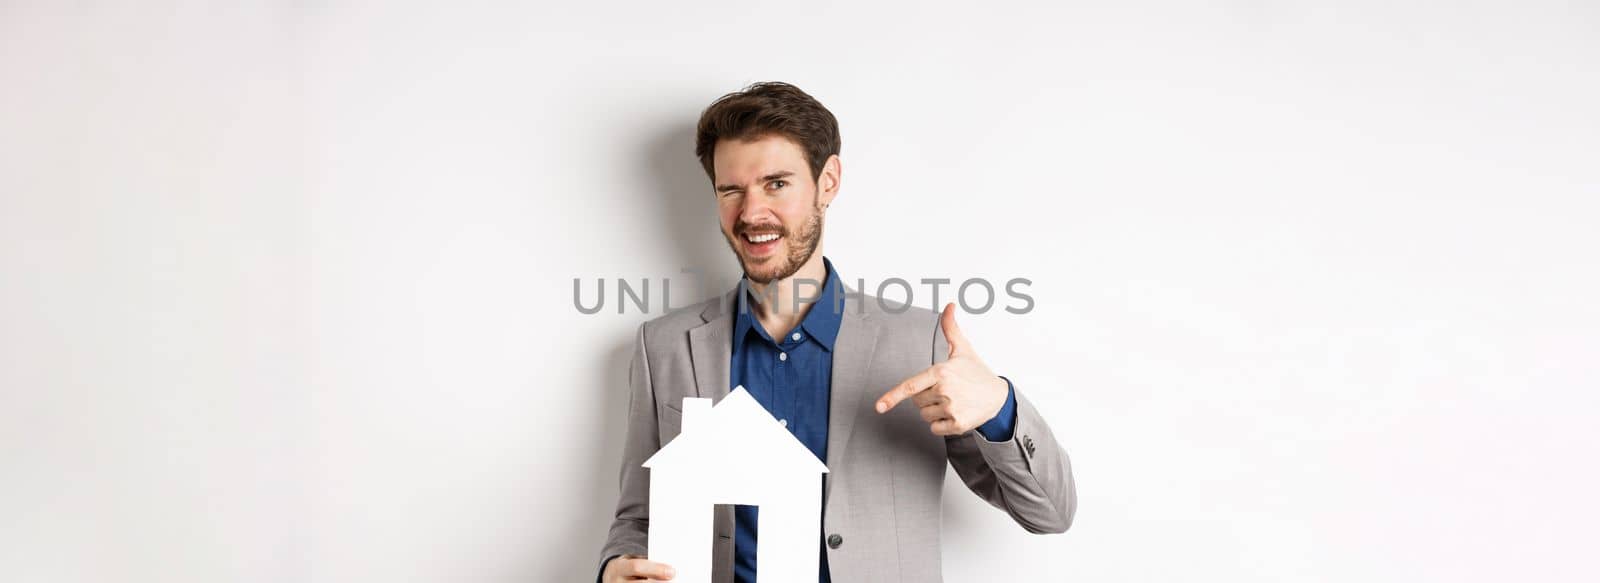 Real estate. Handsome businessman winking and pointing at paper house cutout, advertising company, standing on white background.